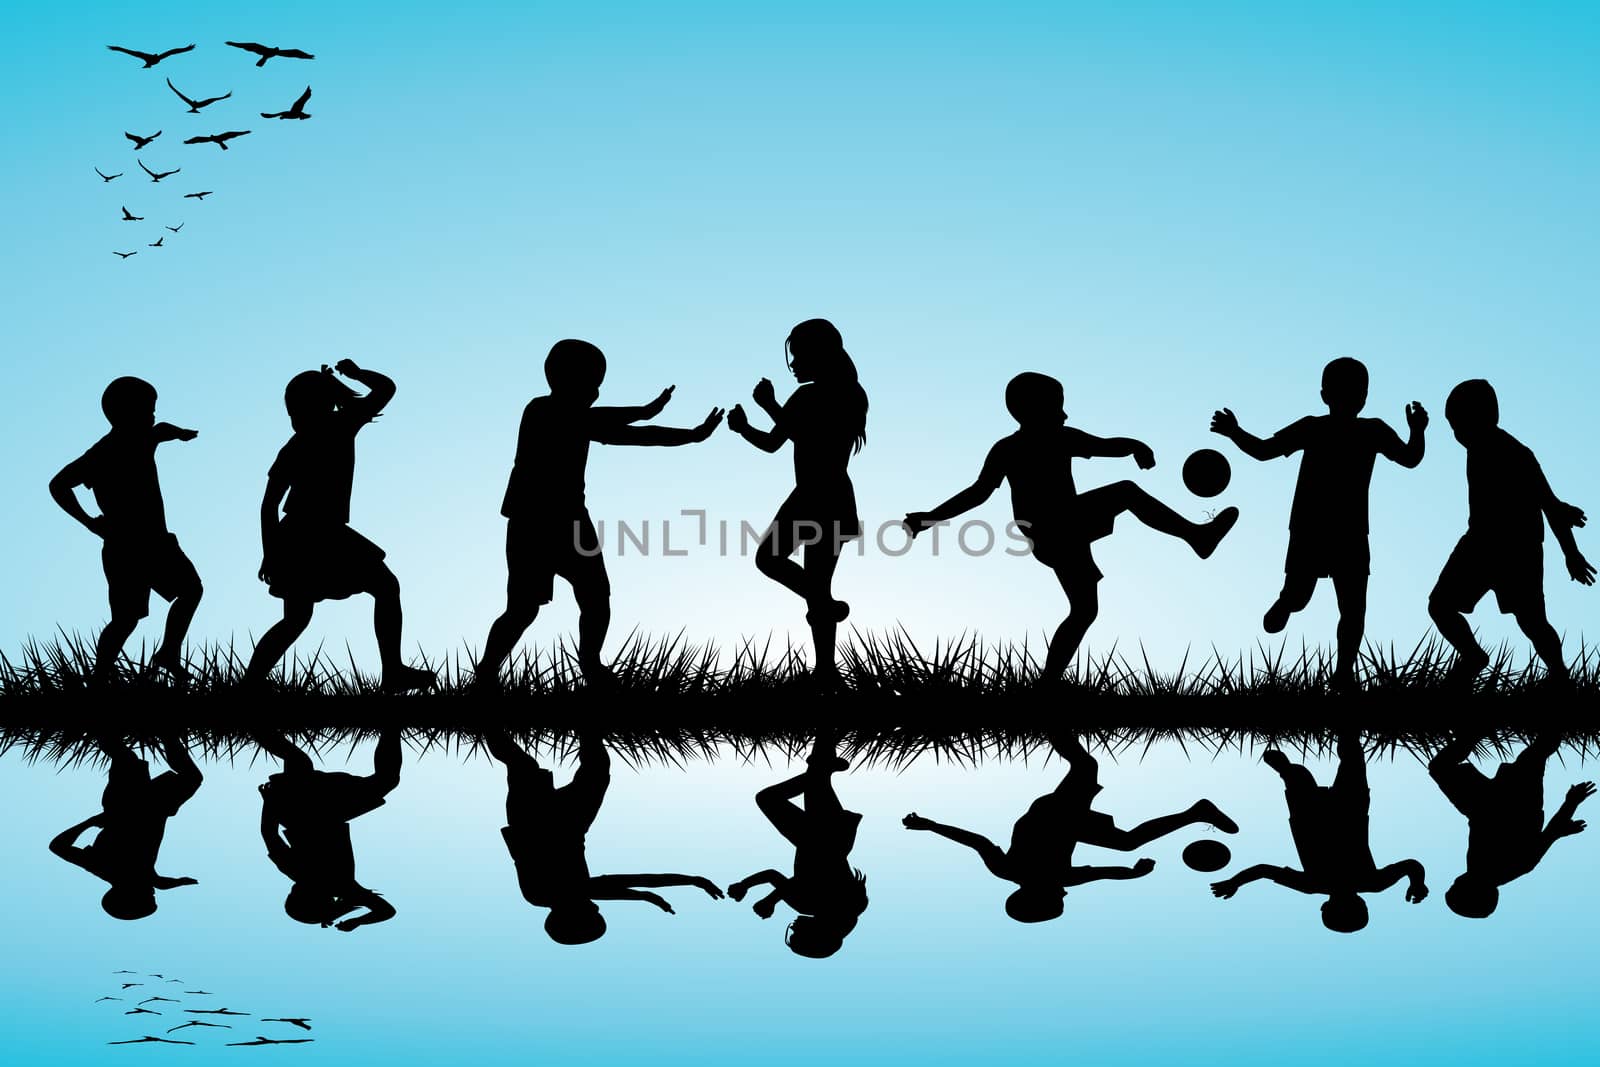 Group of children silhouettes playing outdoor near a lake by hibrida13